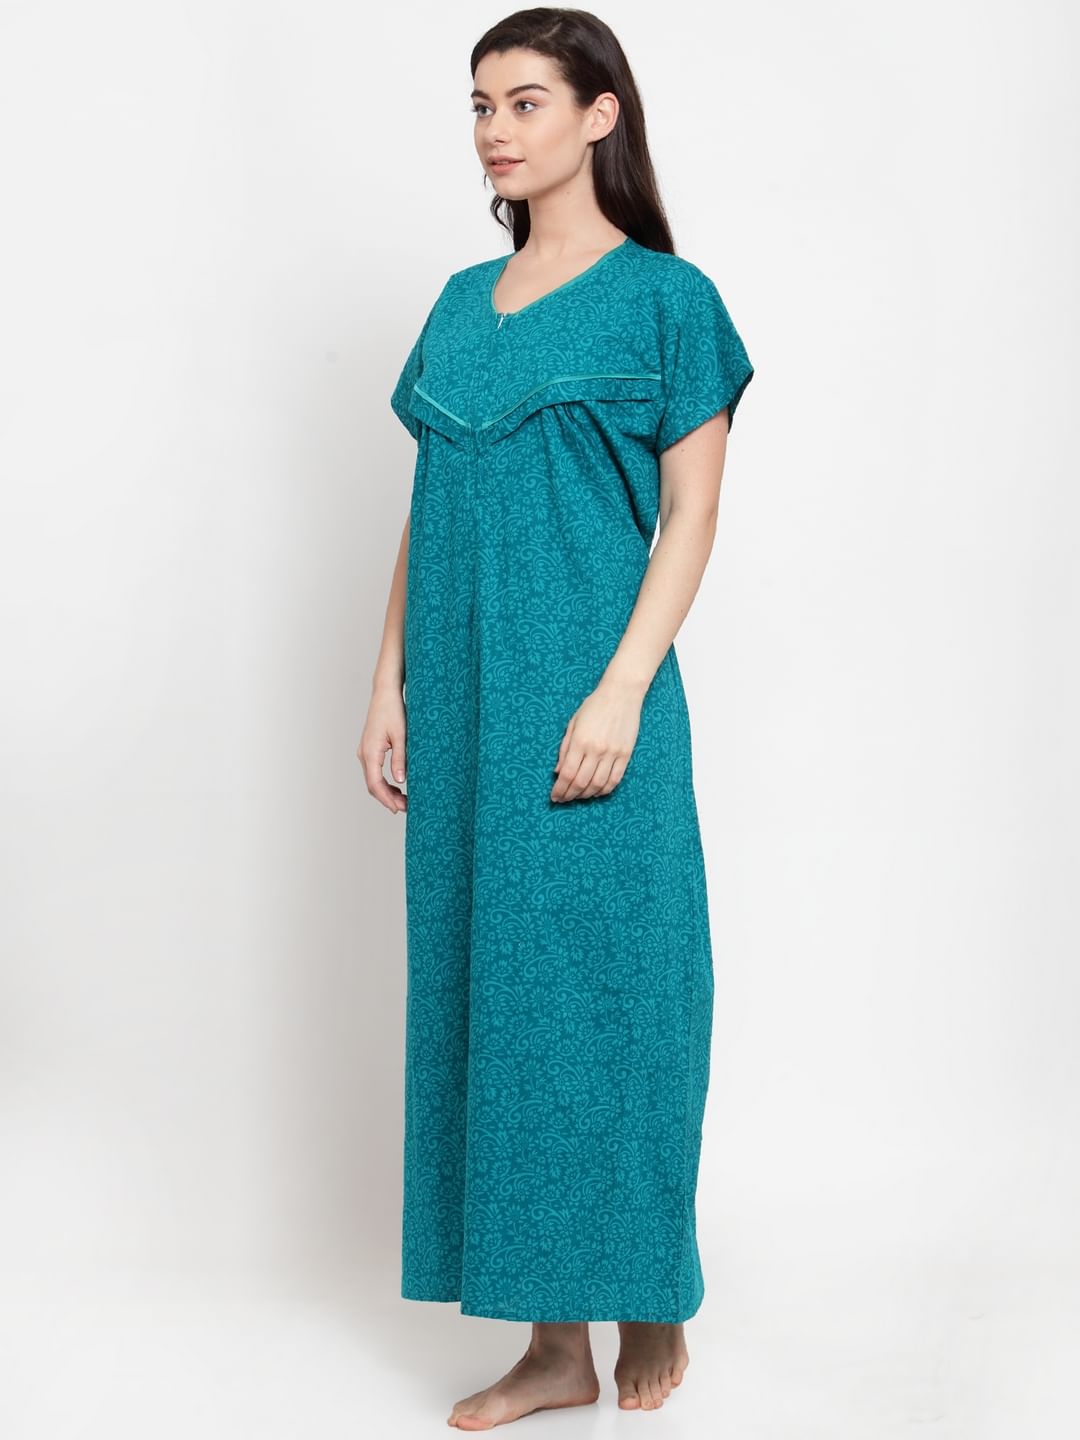 Turquoise Blue Cotton Printed Maternity Nighty (Free Size)